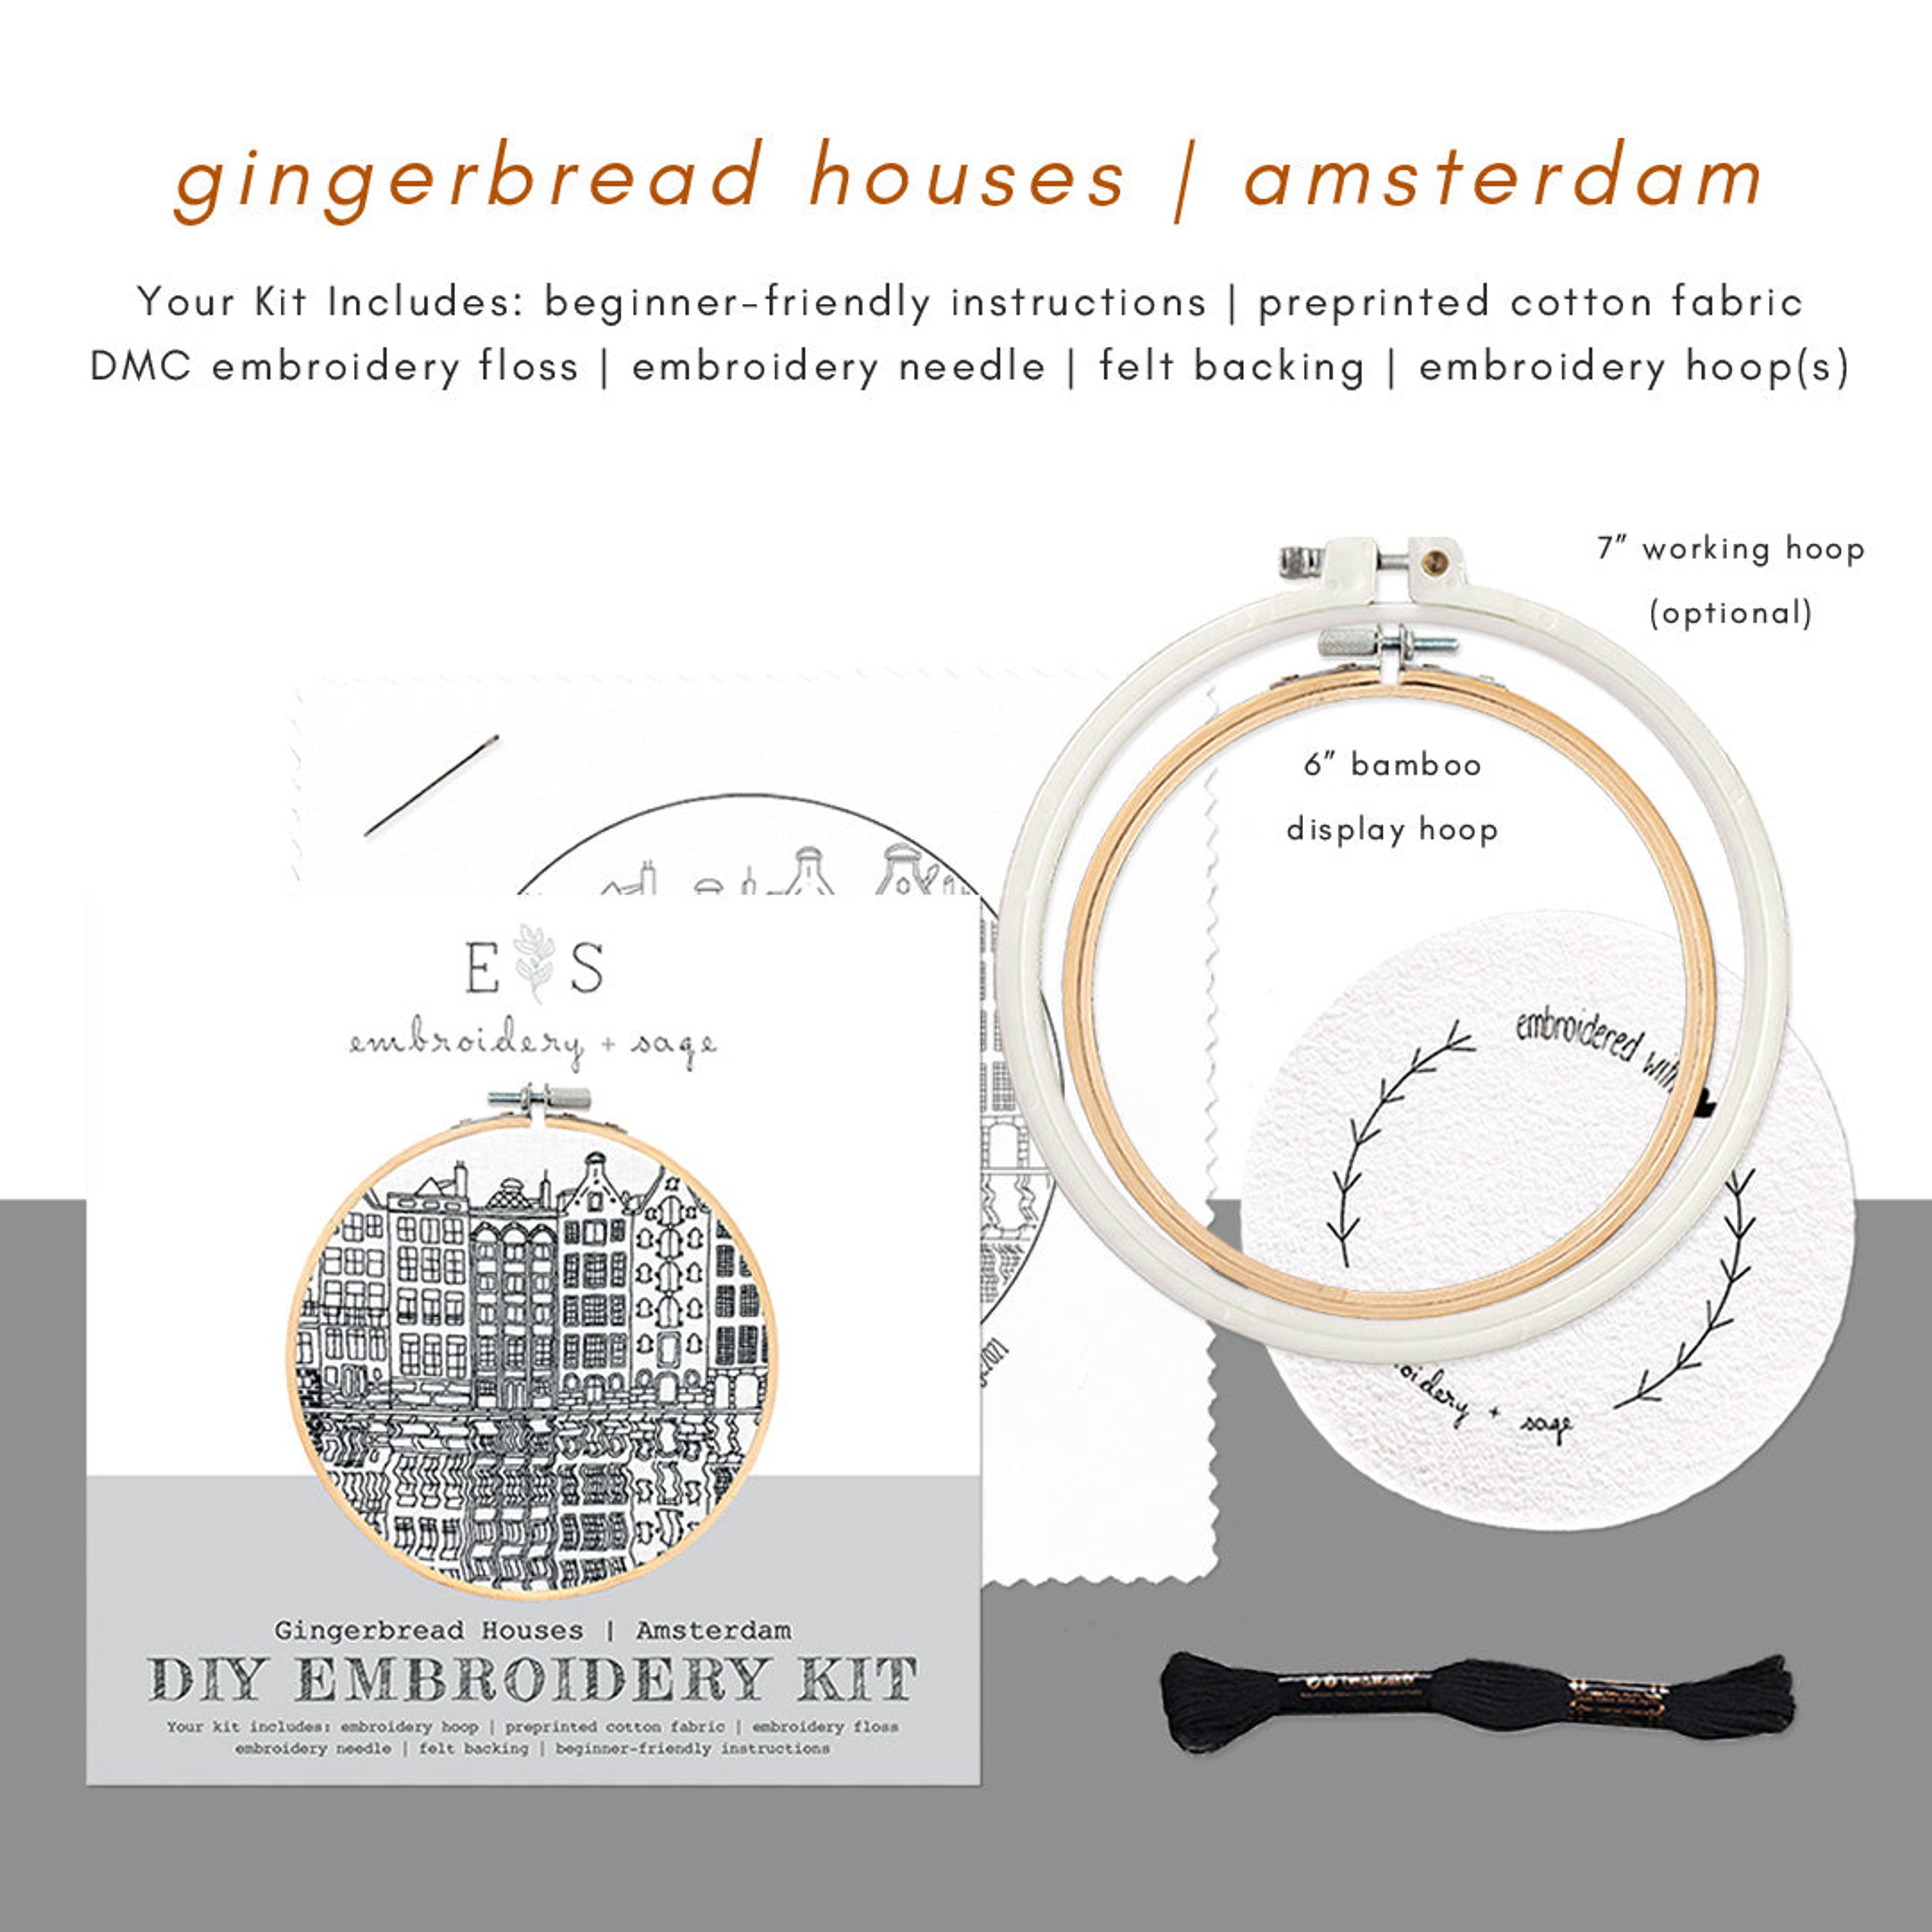 NEW! Gingerbread Houses, Amsterdam - embroidery kit